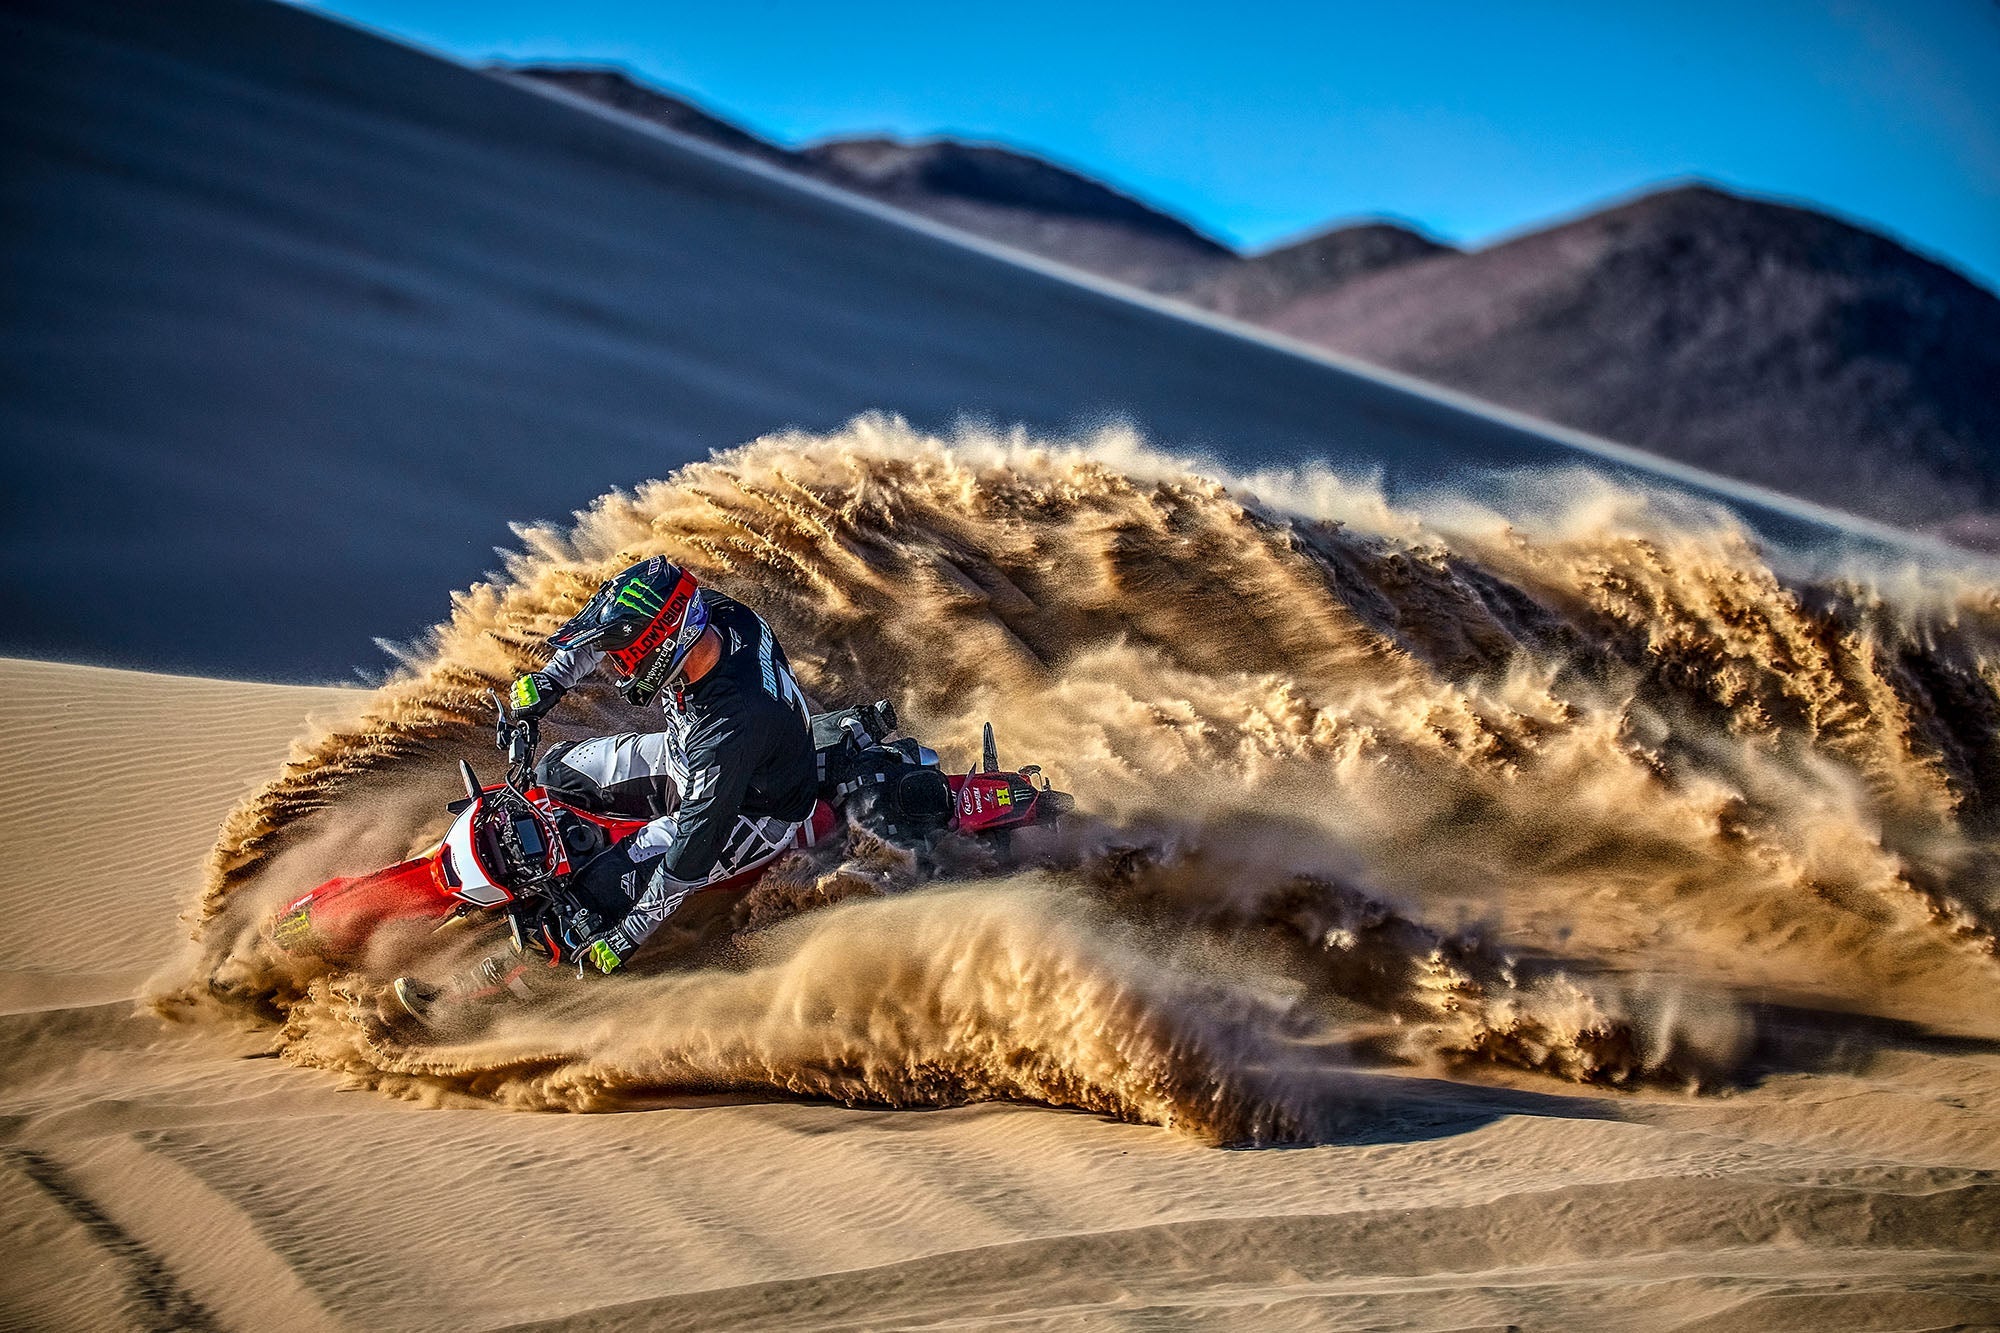 Motorcycle rider roosting in the sand dunes